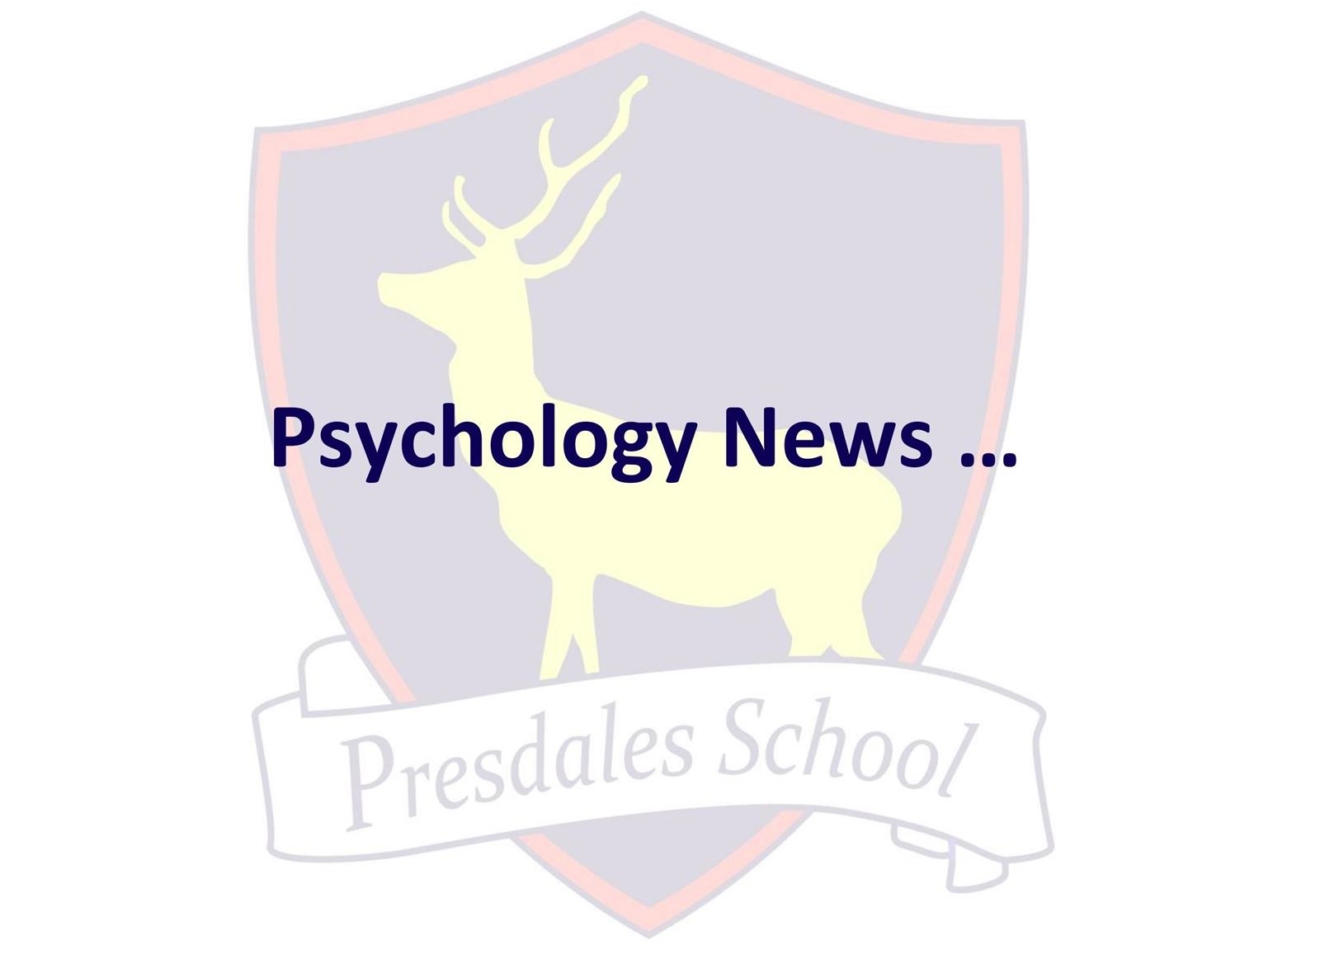 News from Psychology ...